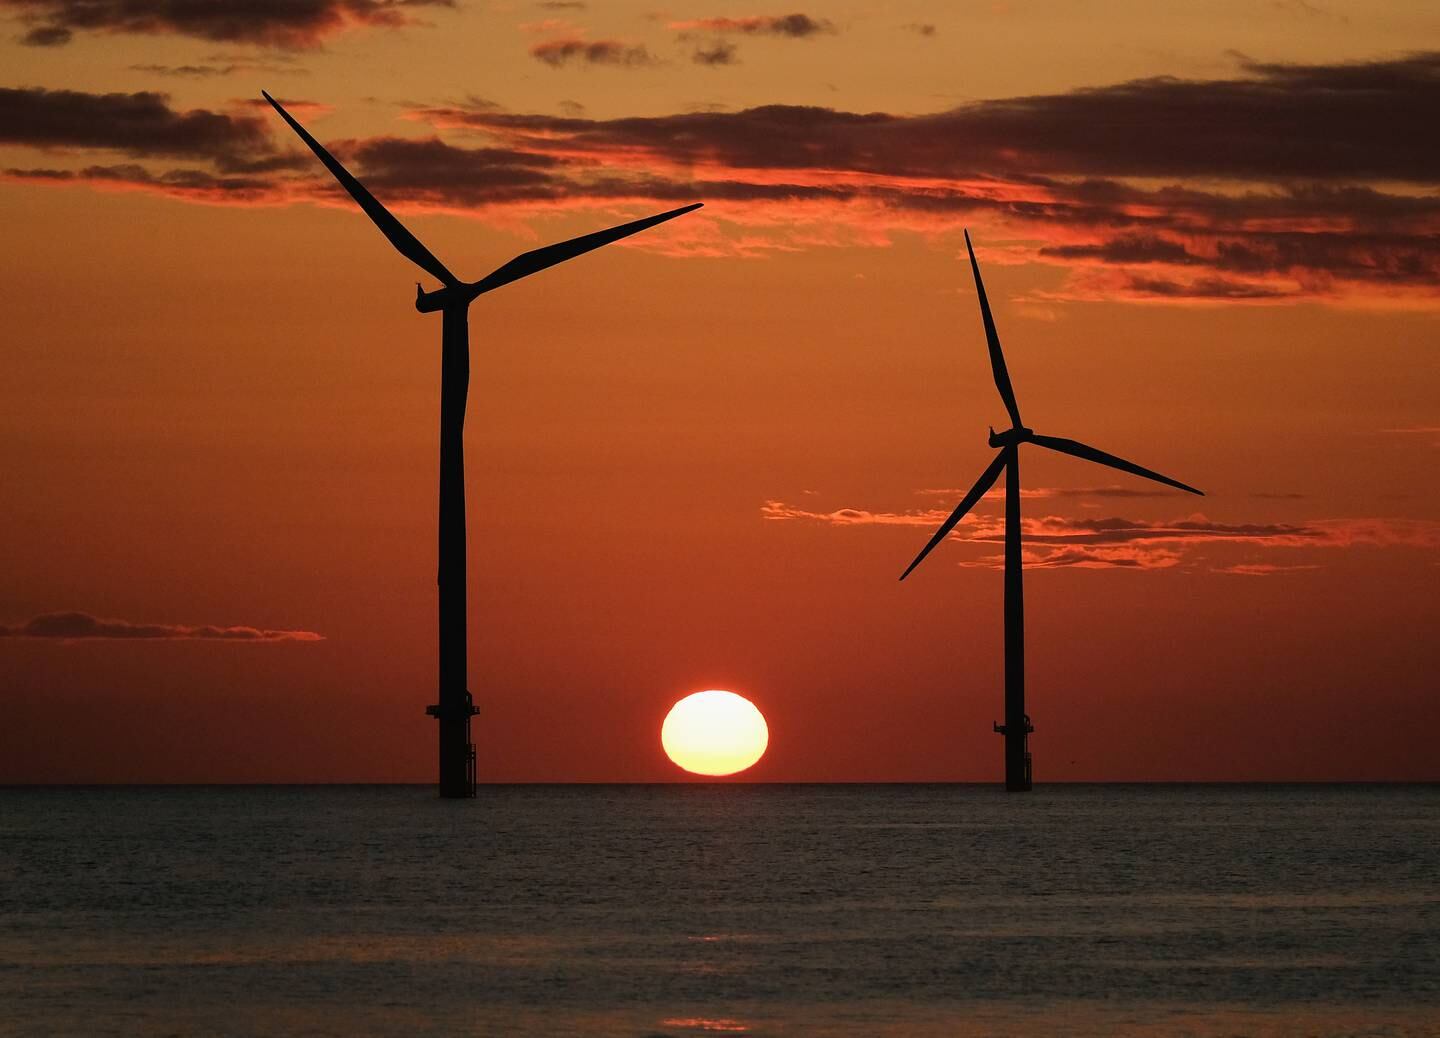 There has been an unusual shortage of big autumnal blows to drive the large North Sea wind turbine farms. Getty Images